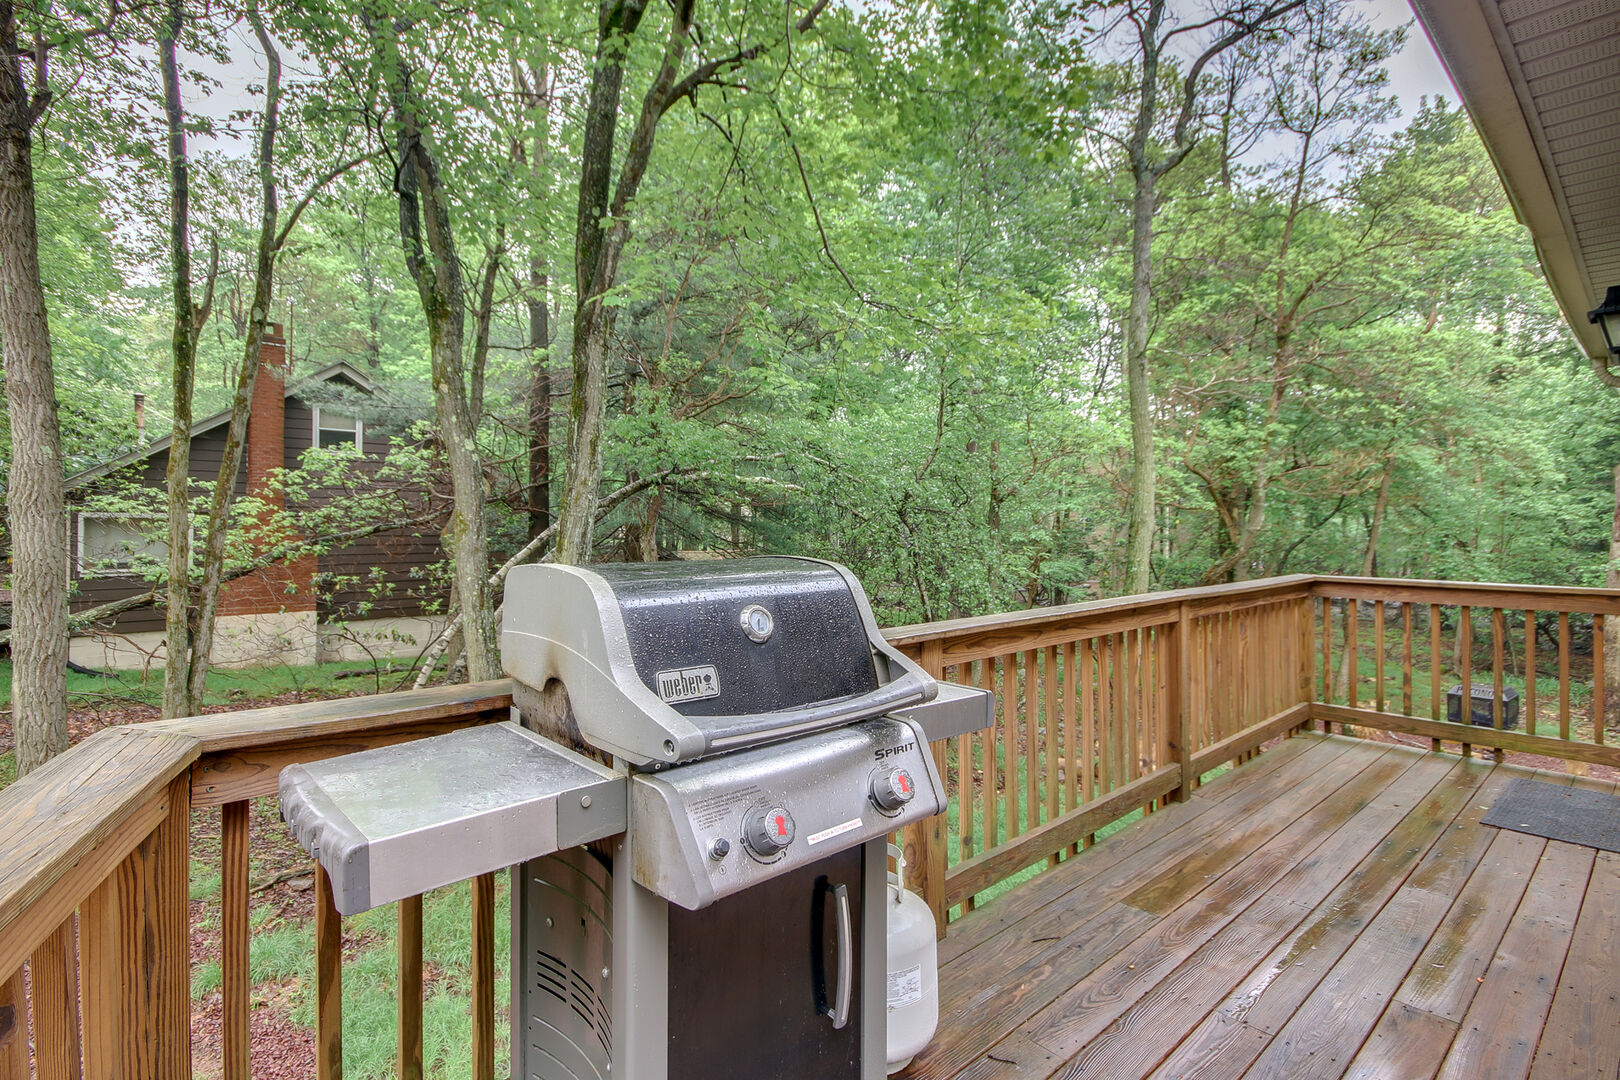 A Grill Located on the Deck Attached to Our Vacation Rental in the Poconos by Lake.